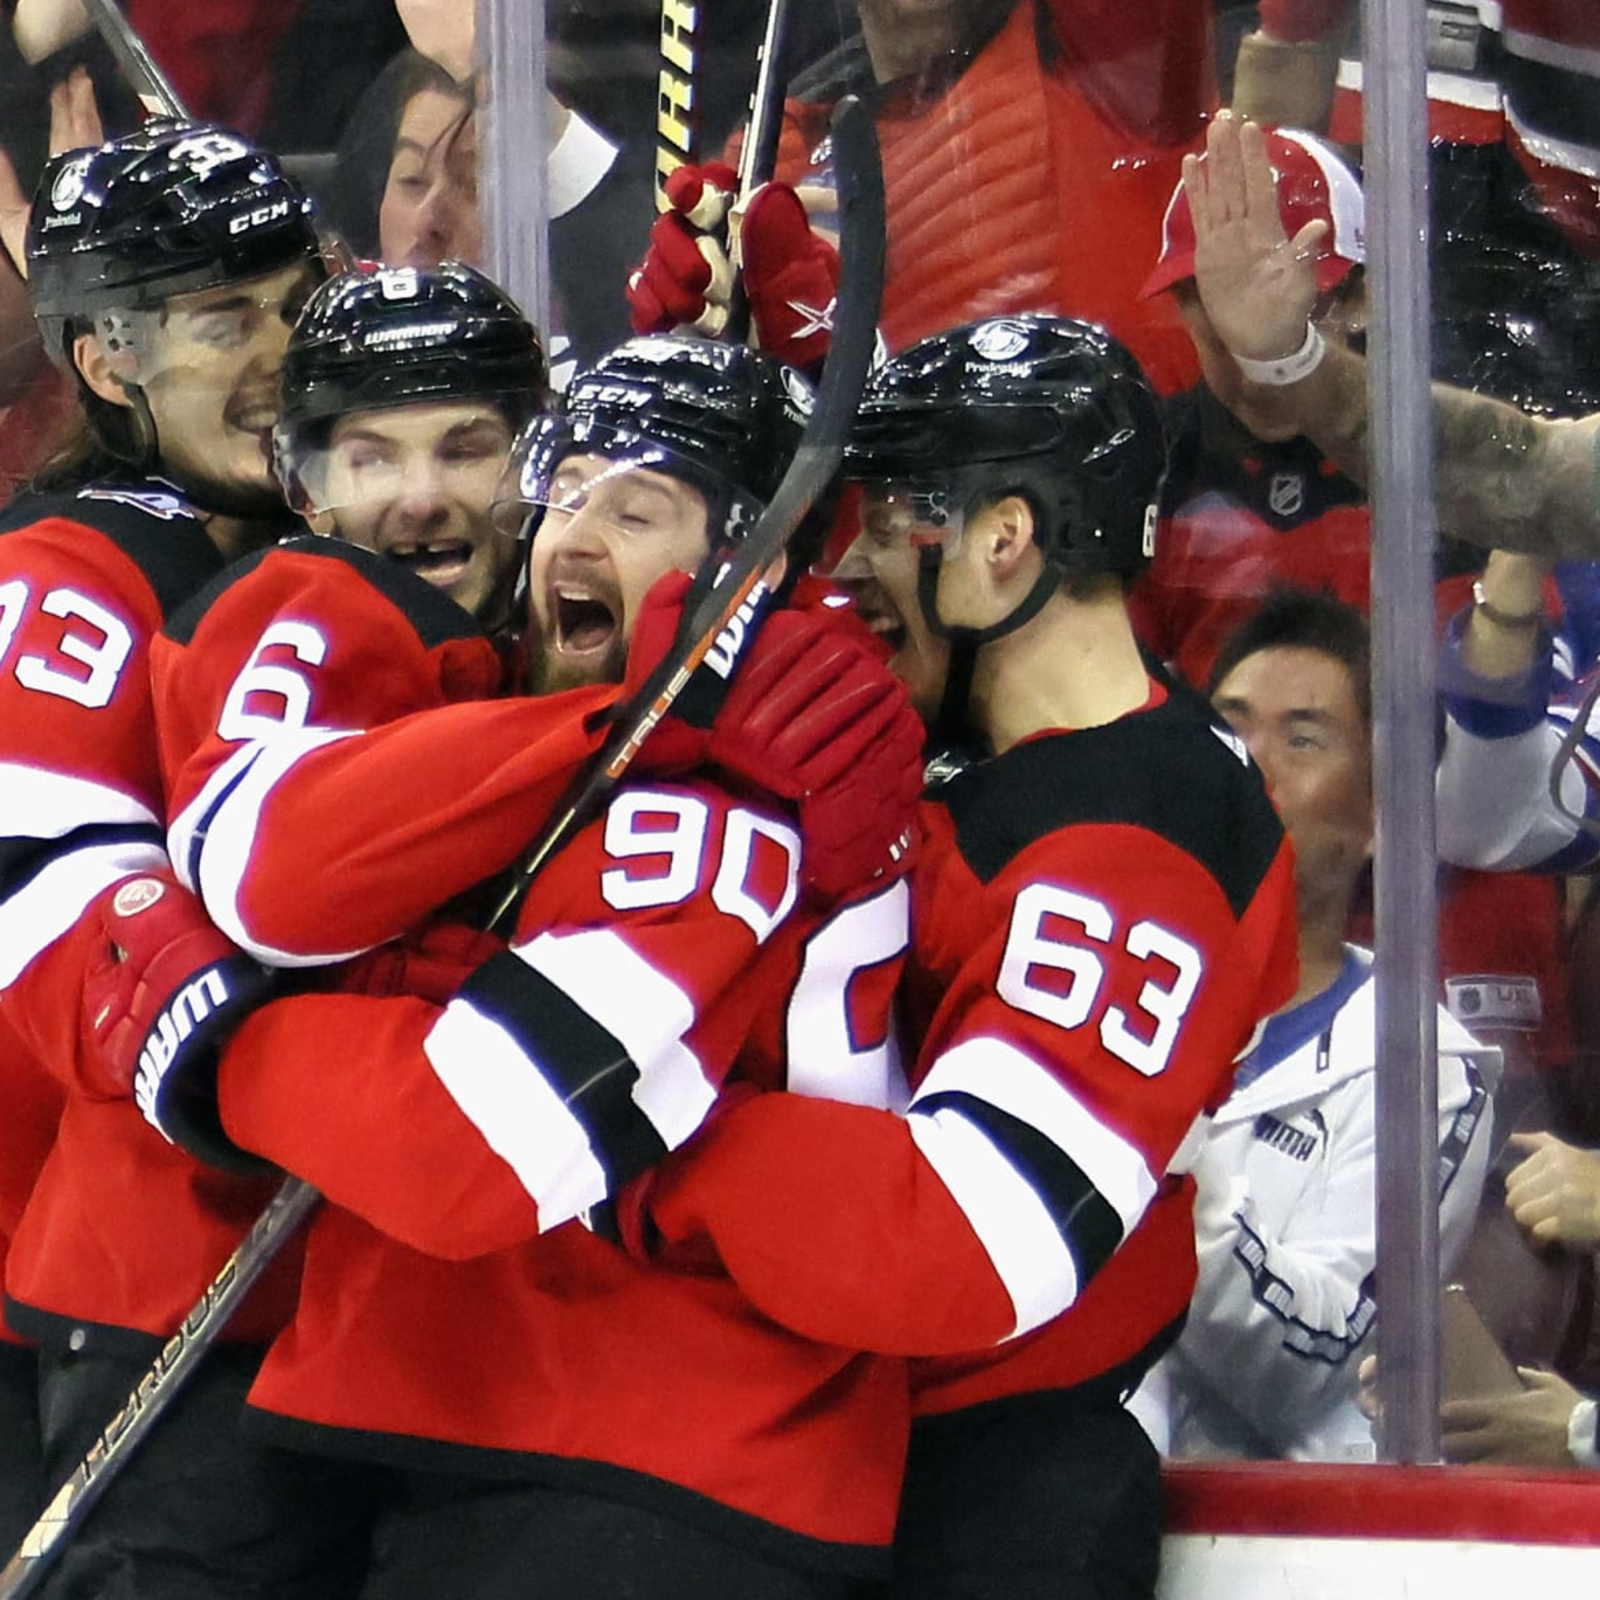 For Devils, Game 7 is the chance for a forever moment against Rangers